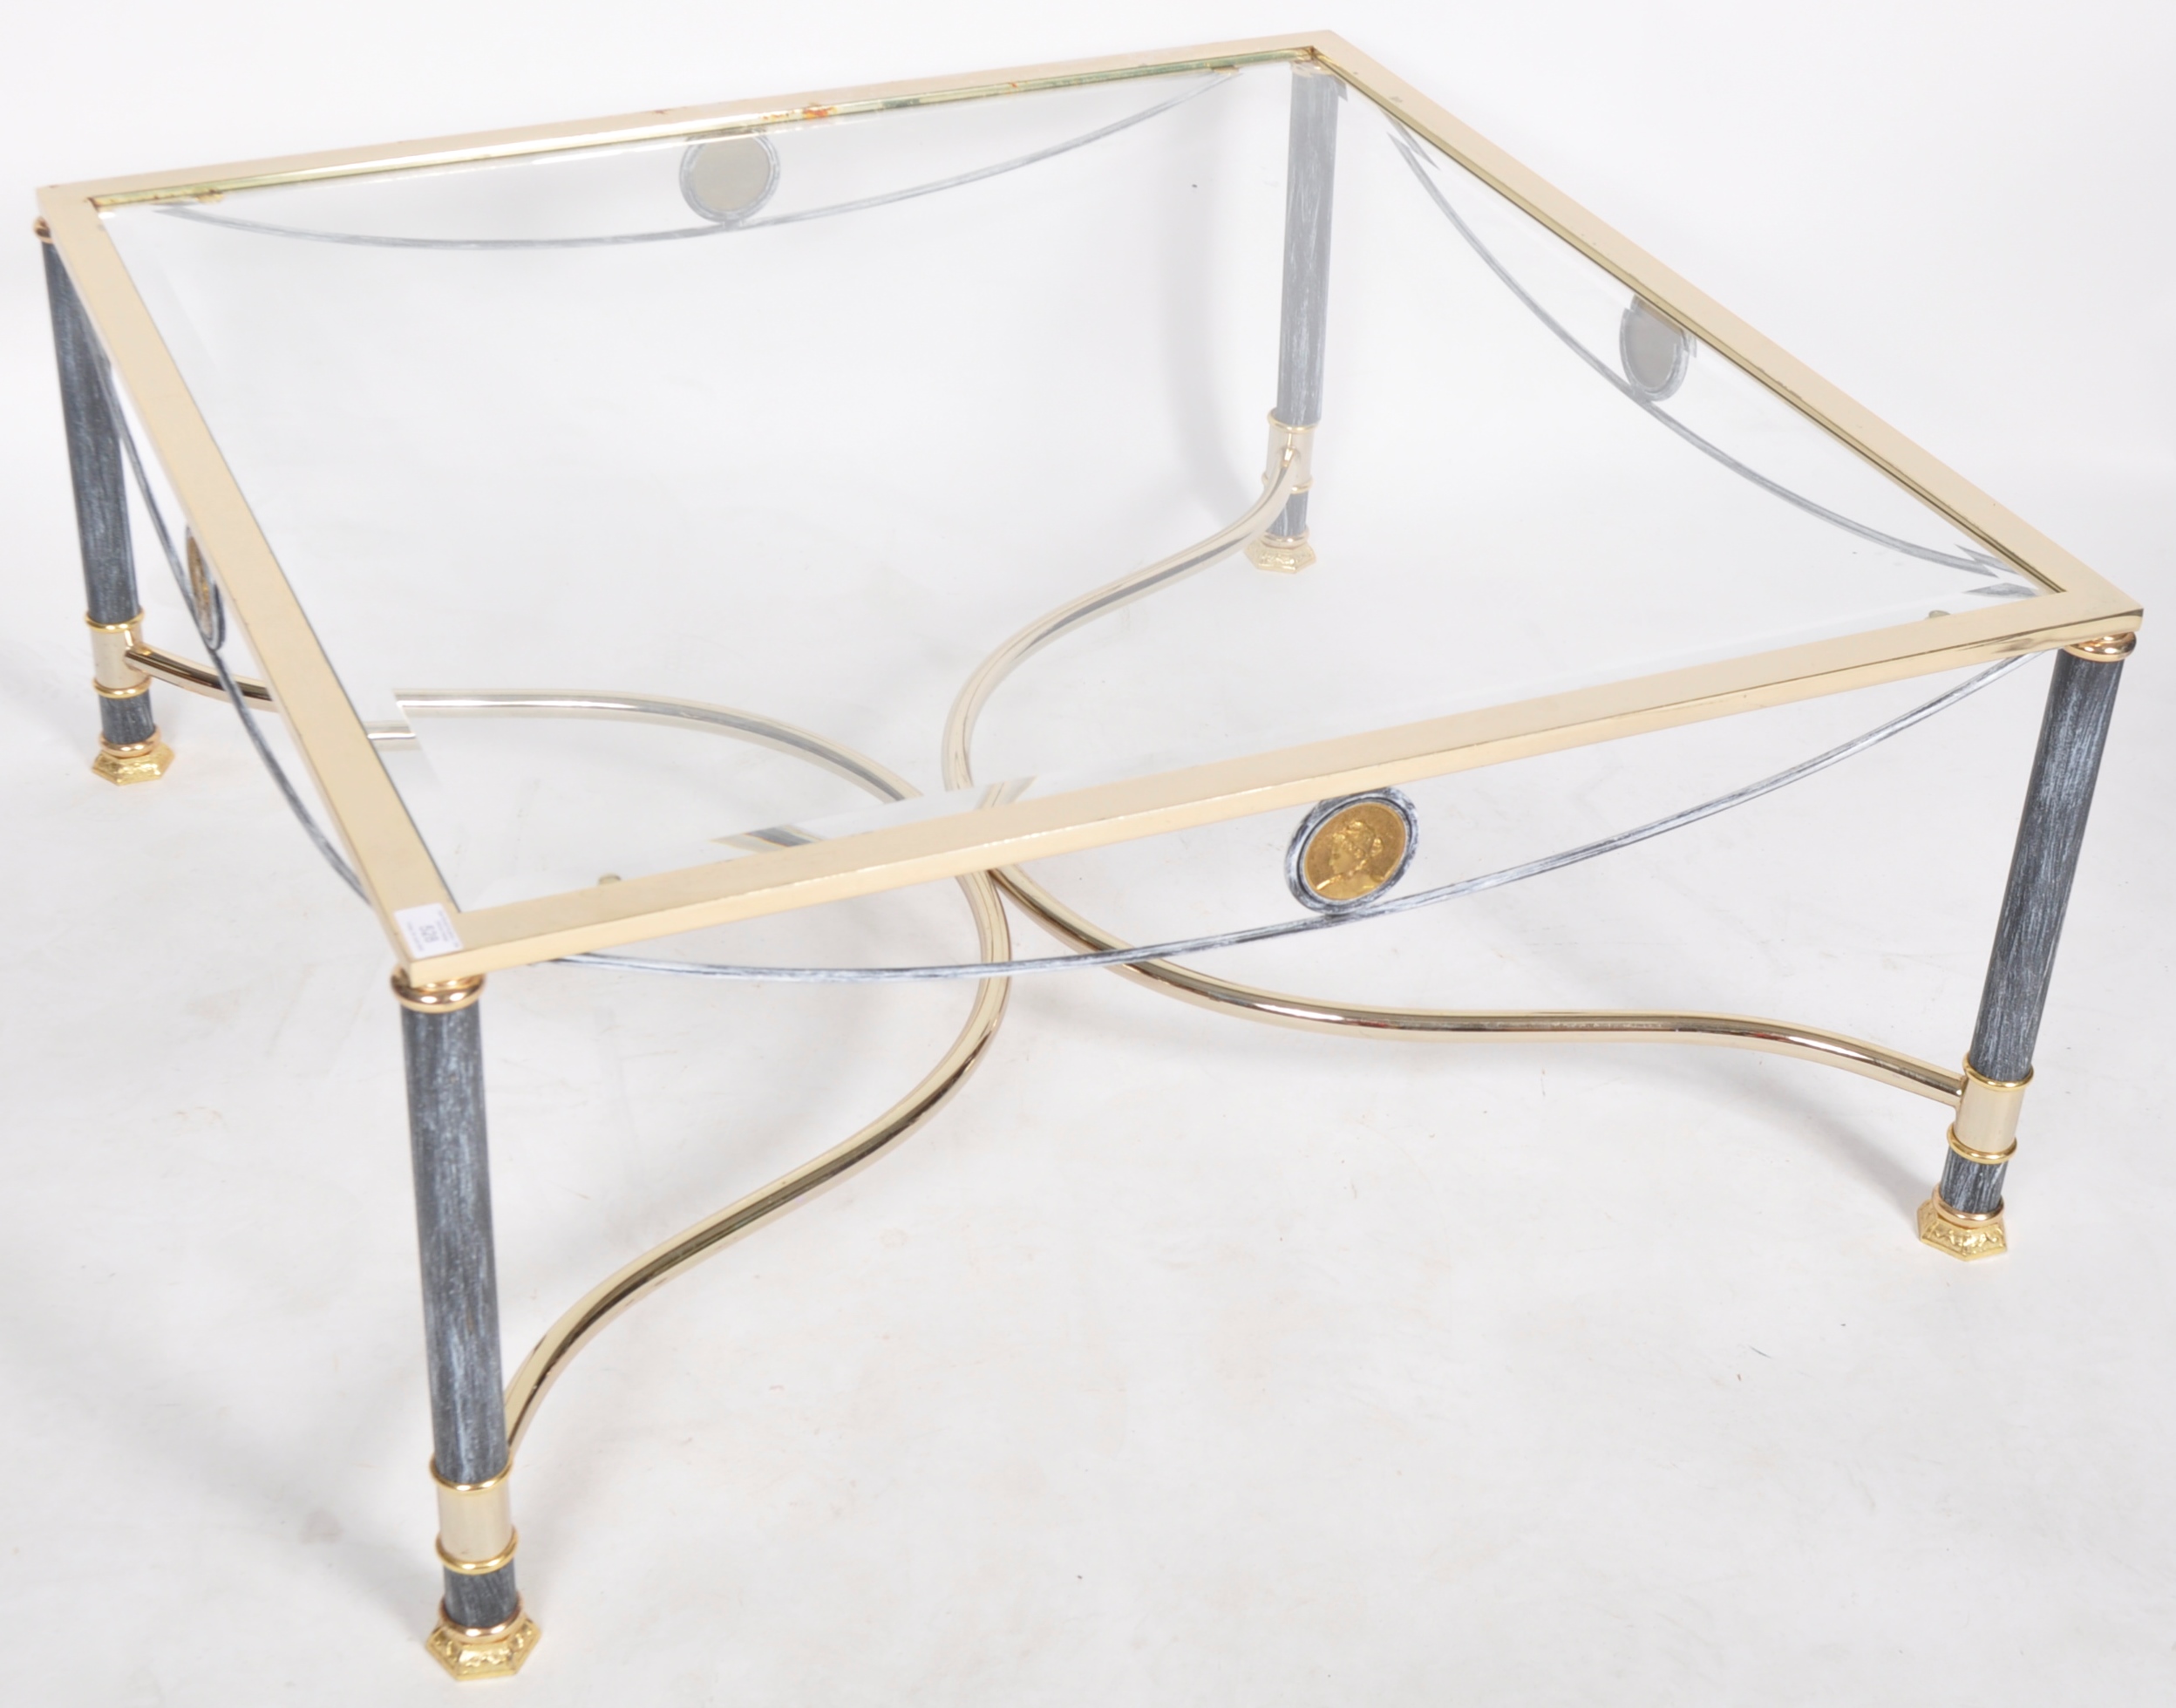 HOLLYWOOD REGENCY NEOCLASSICAL GLASS & BRASS TABLE - Image 2 of 6